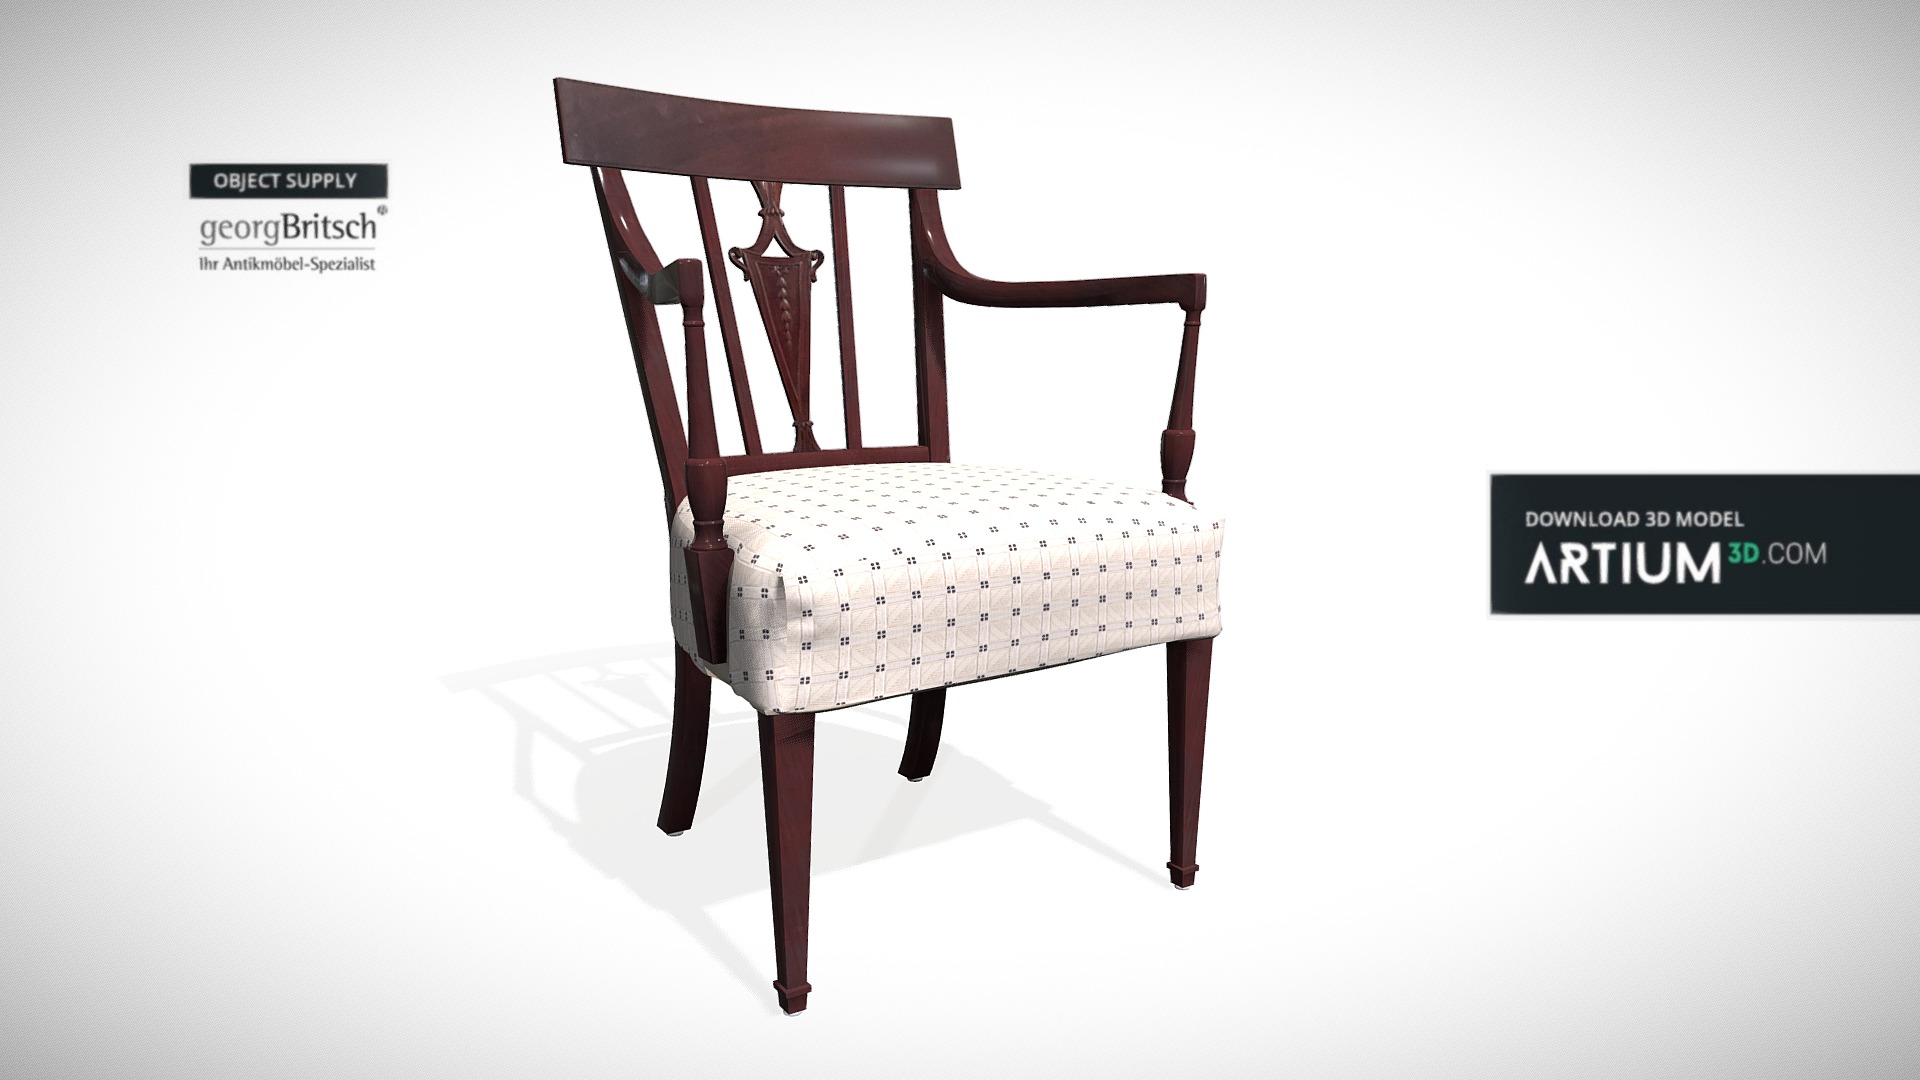 3D model Armchair – England about 1900 – Georg Britsch - This is a 3D model of the Armchair - England about 1900 - Georg Britsch. The 3D model is about a wooden chair with a white background.